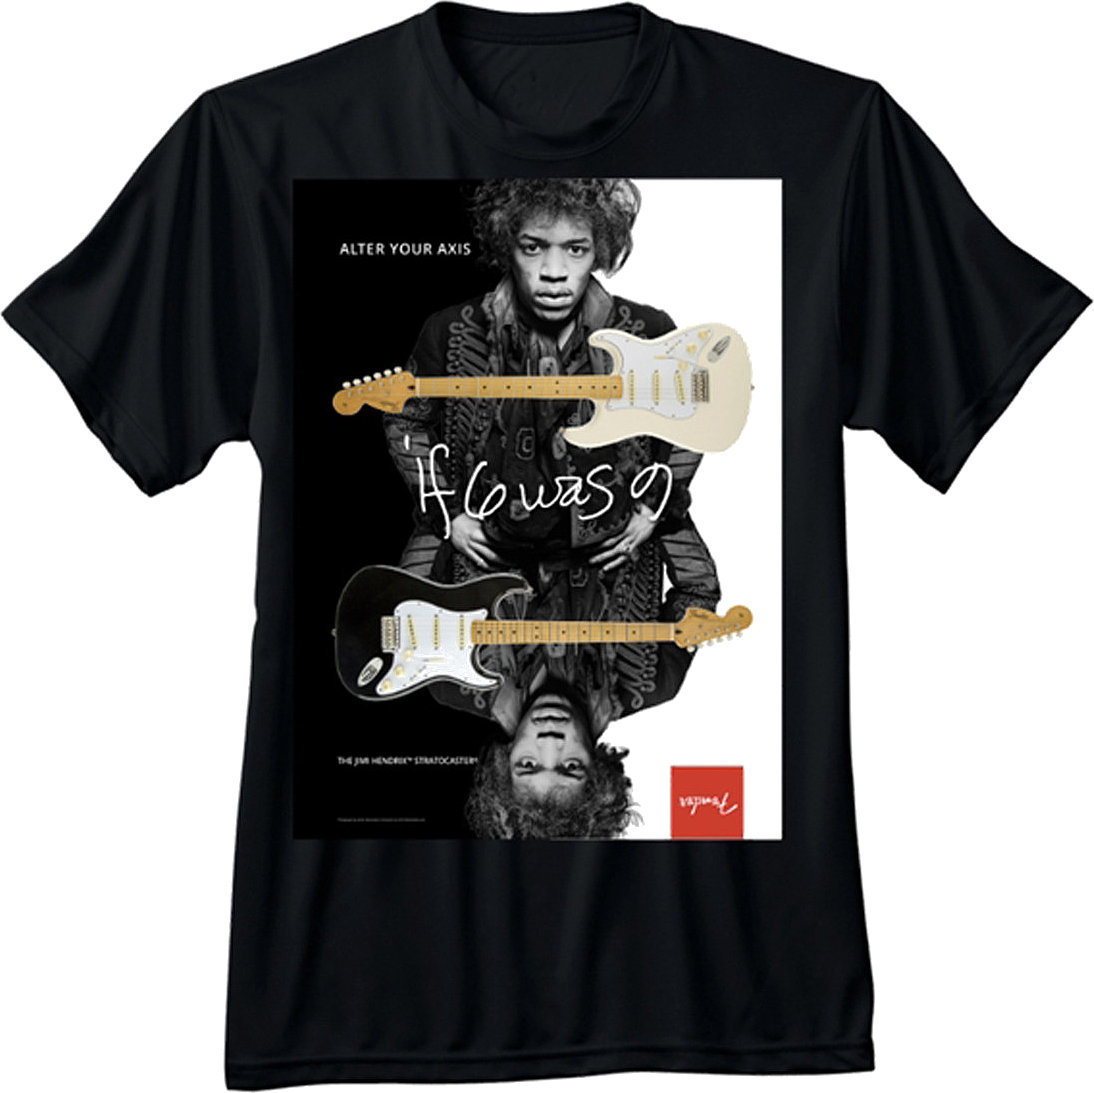 Ing Fender Jimi Hendrix Collection Alter Your Axis T-Shirt Black L